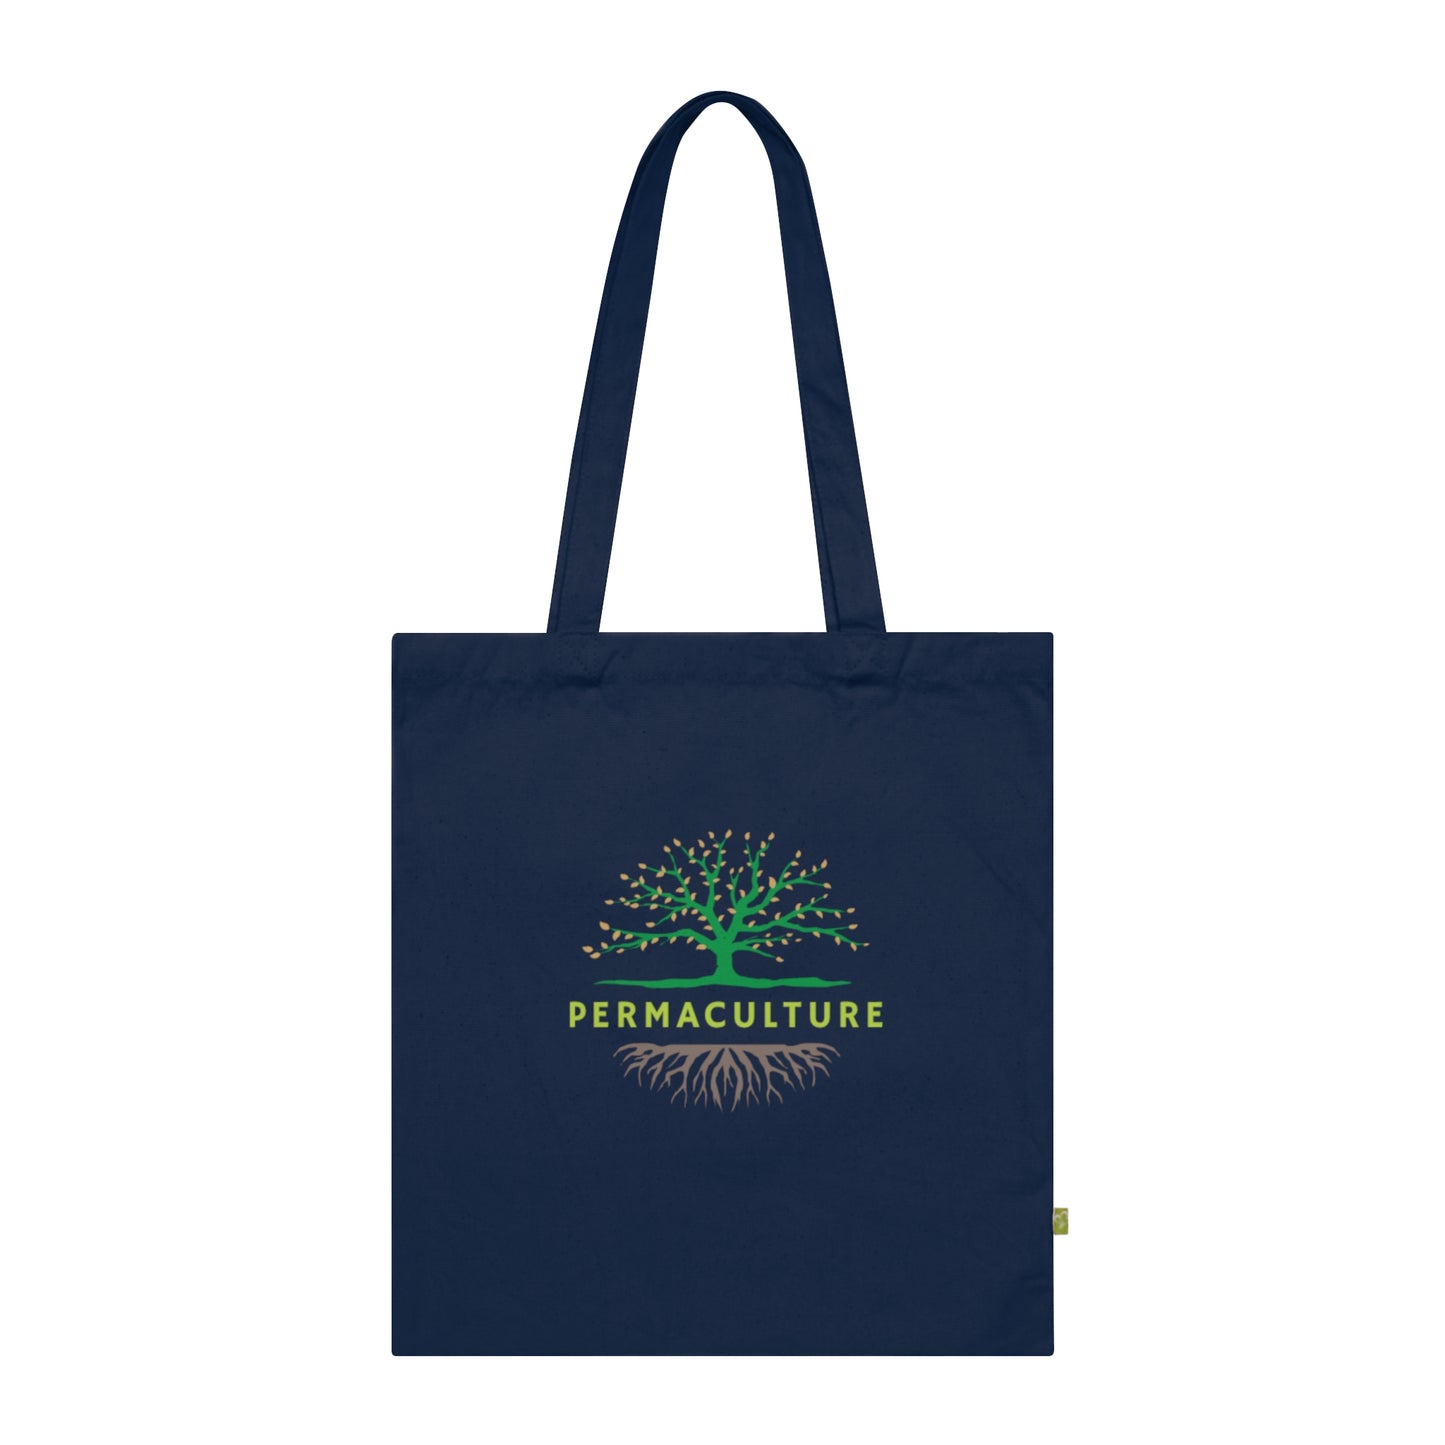 PERMACULTURE Organic Cotton Tote Bag